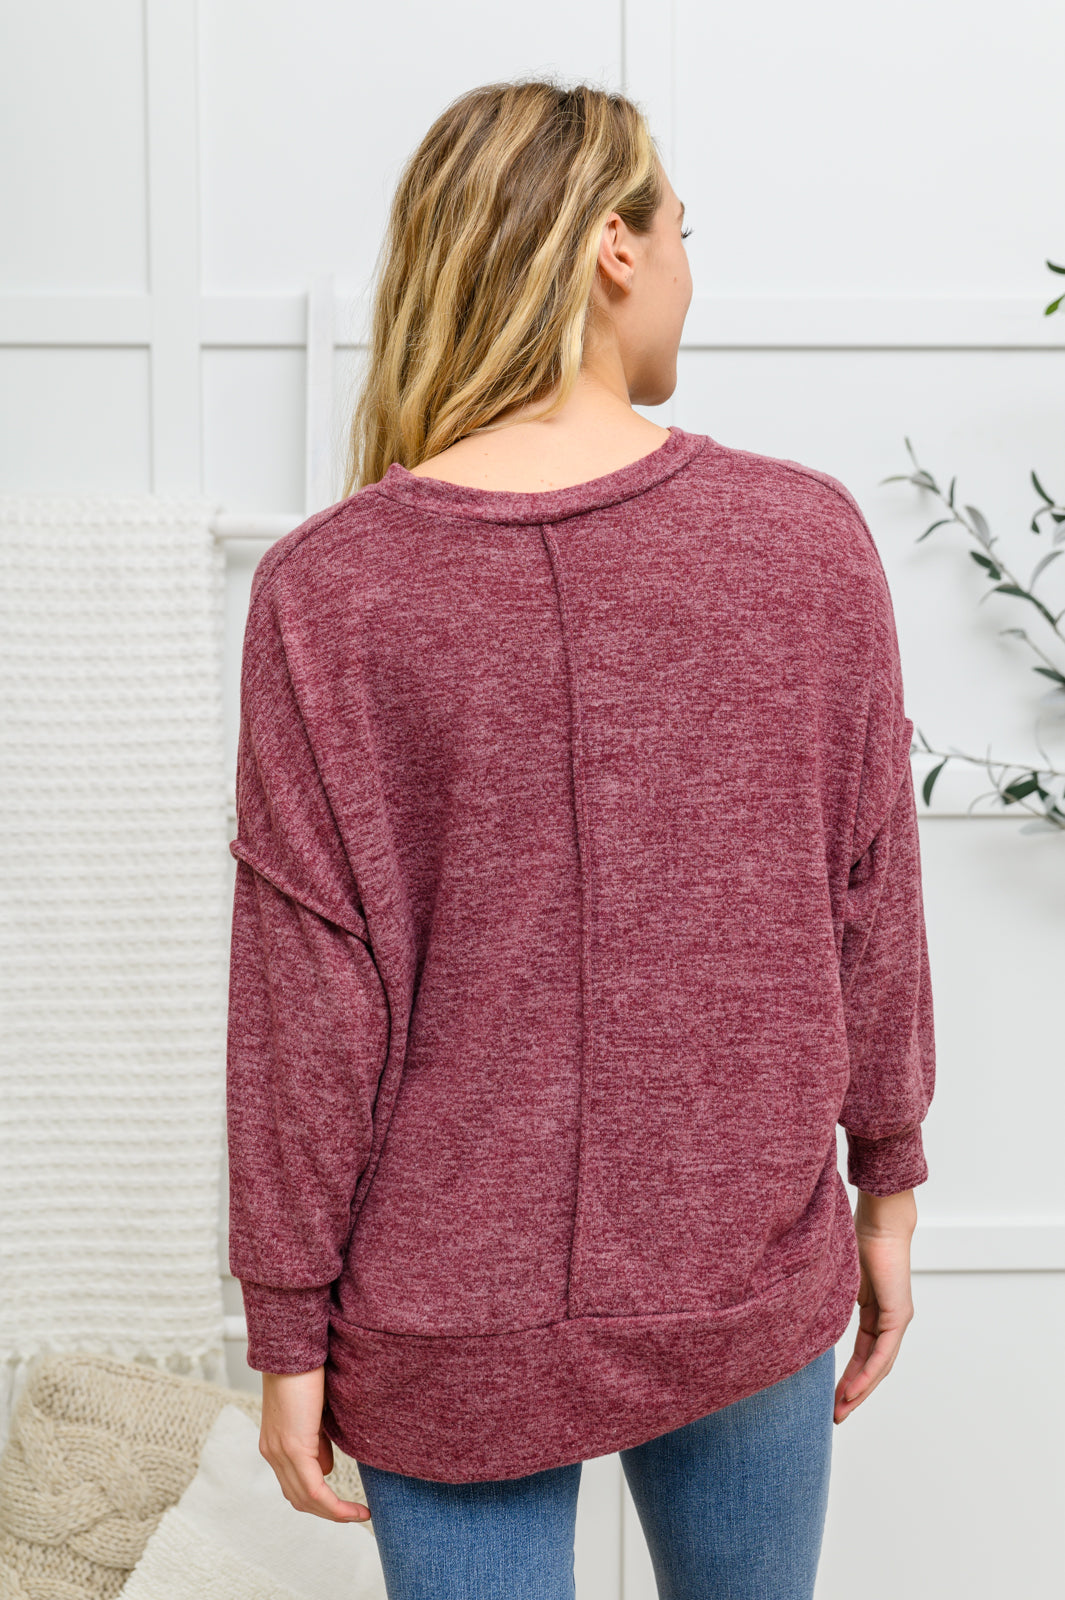 Brushed Soft Sweater In Burgundy - 11/25/2022